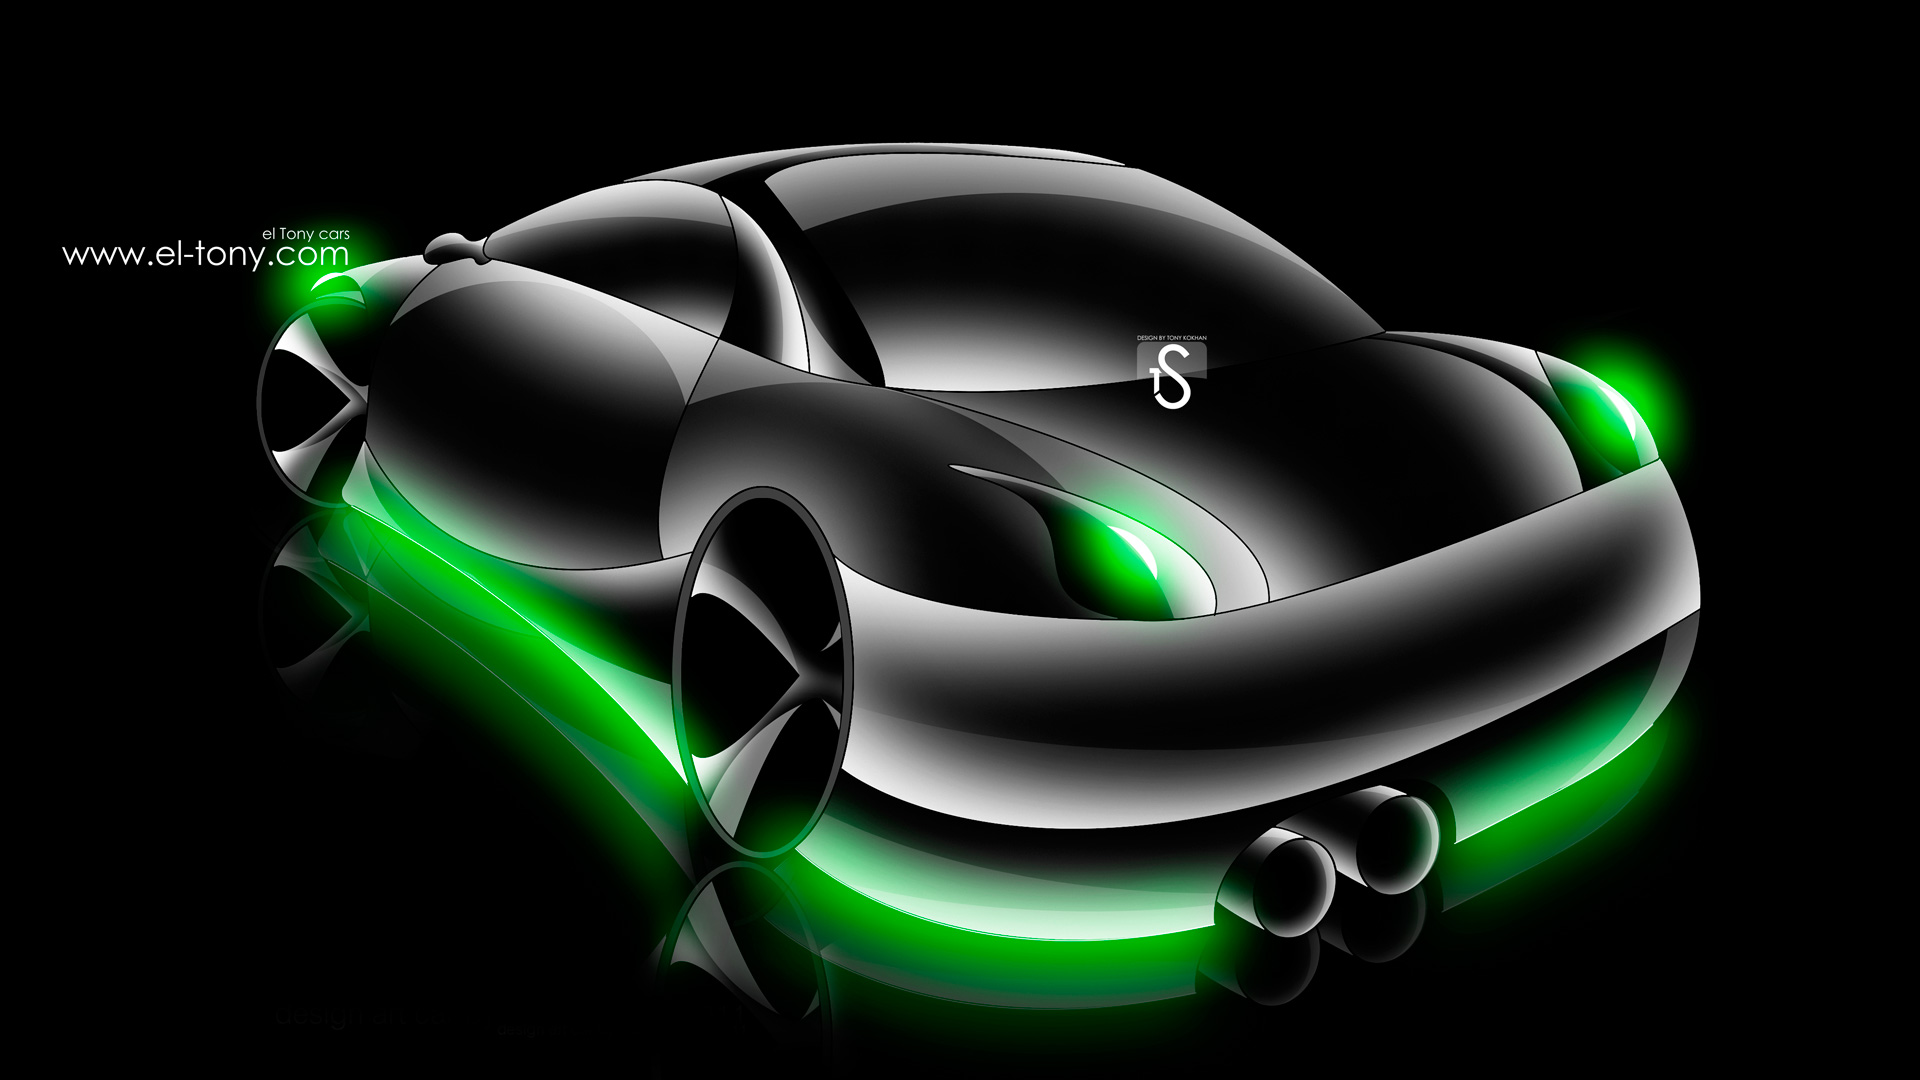 Tony Style Back 3D Green Neon Car 2014 HD Wallpapers design by Tony